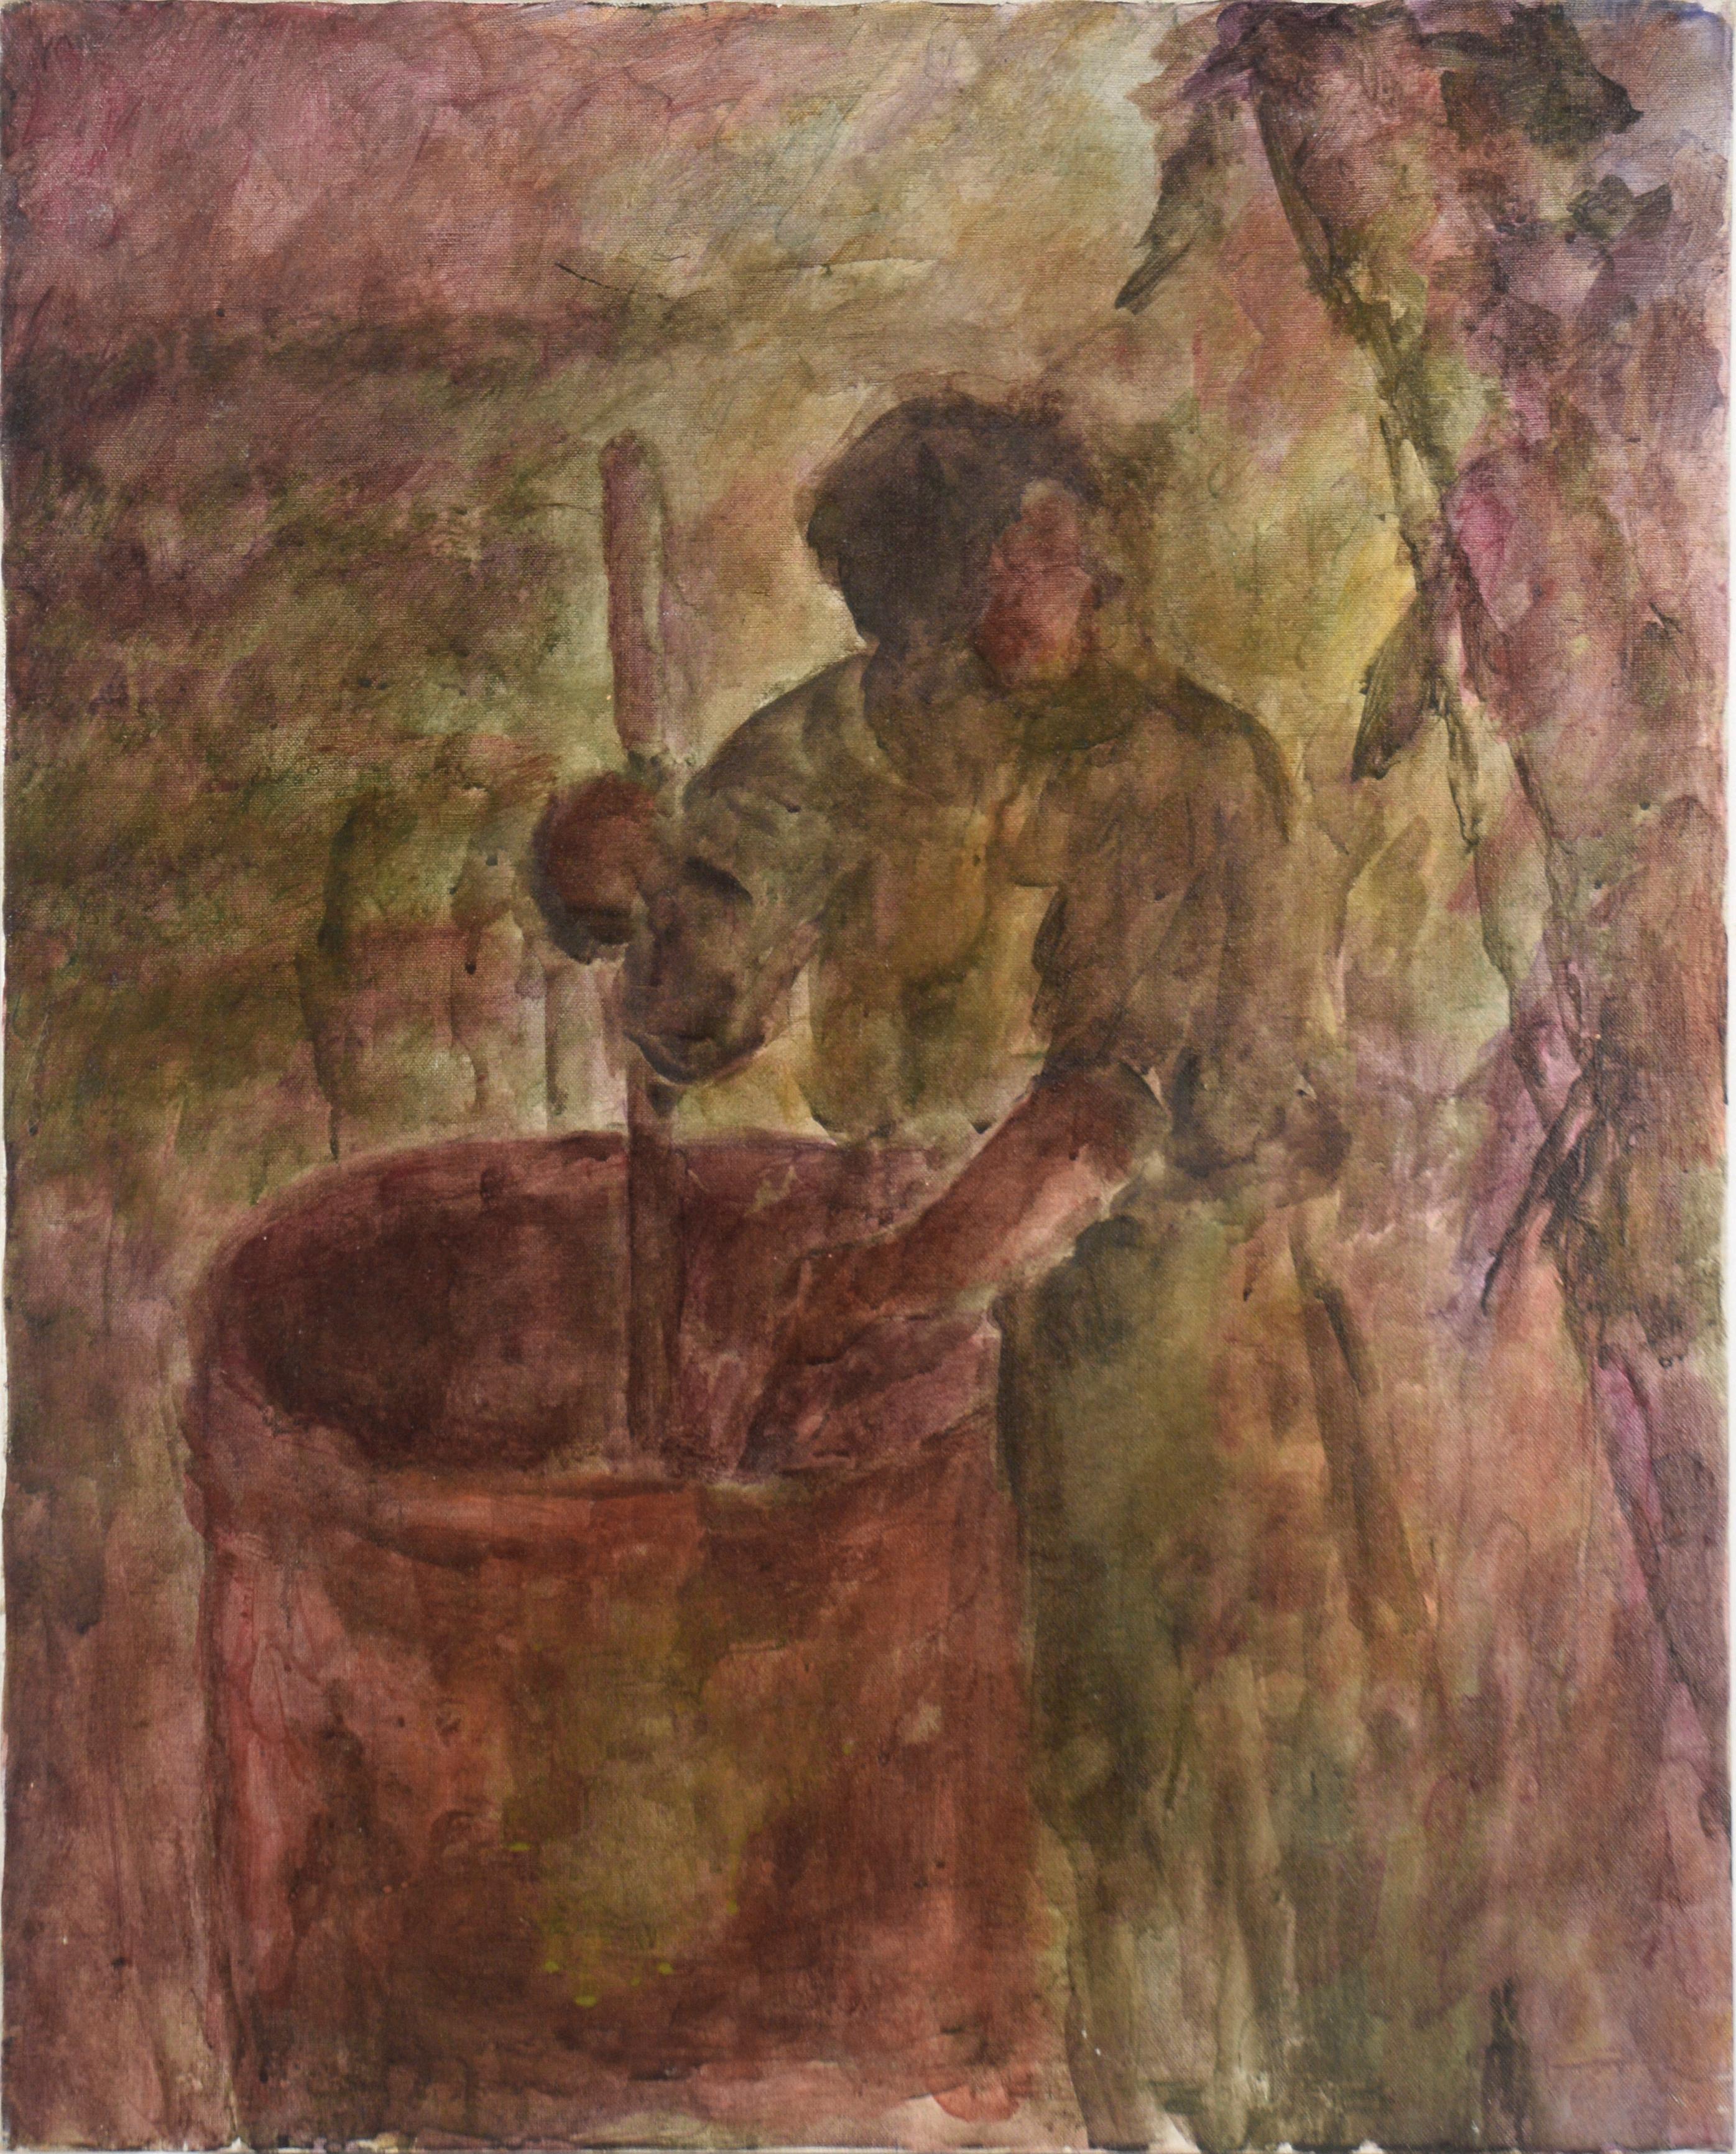 Unknown Figurative Painting - Washerwoman Doing the Laundry